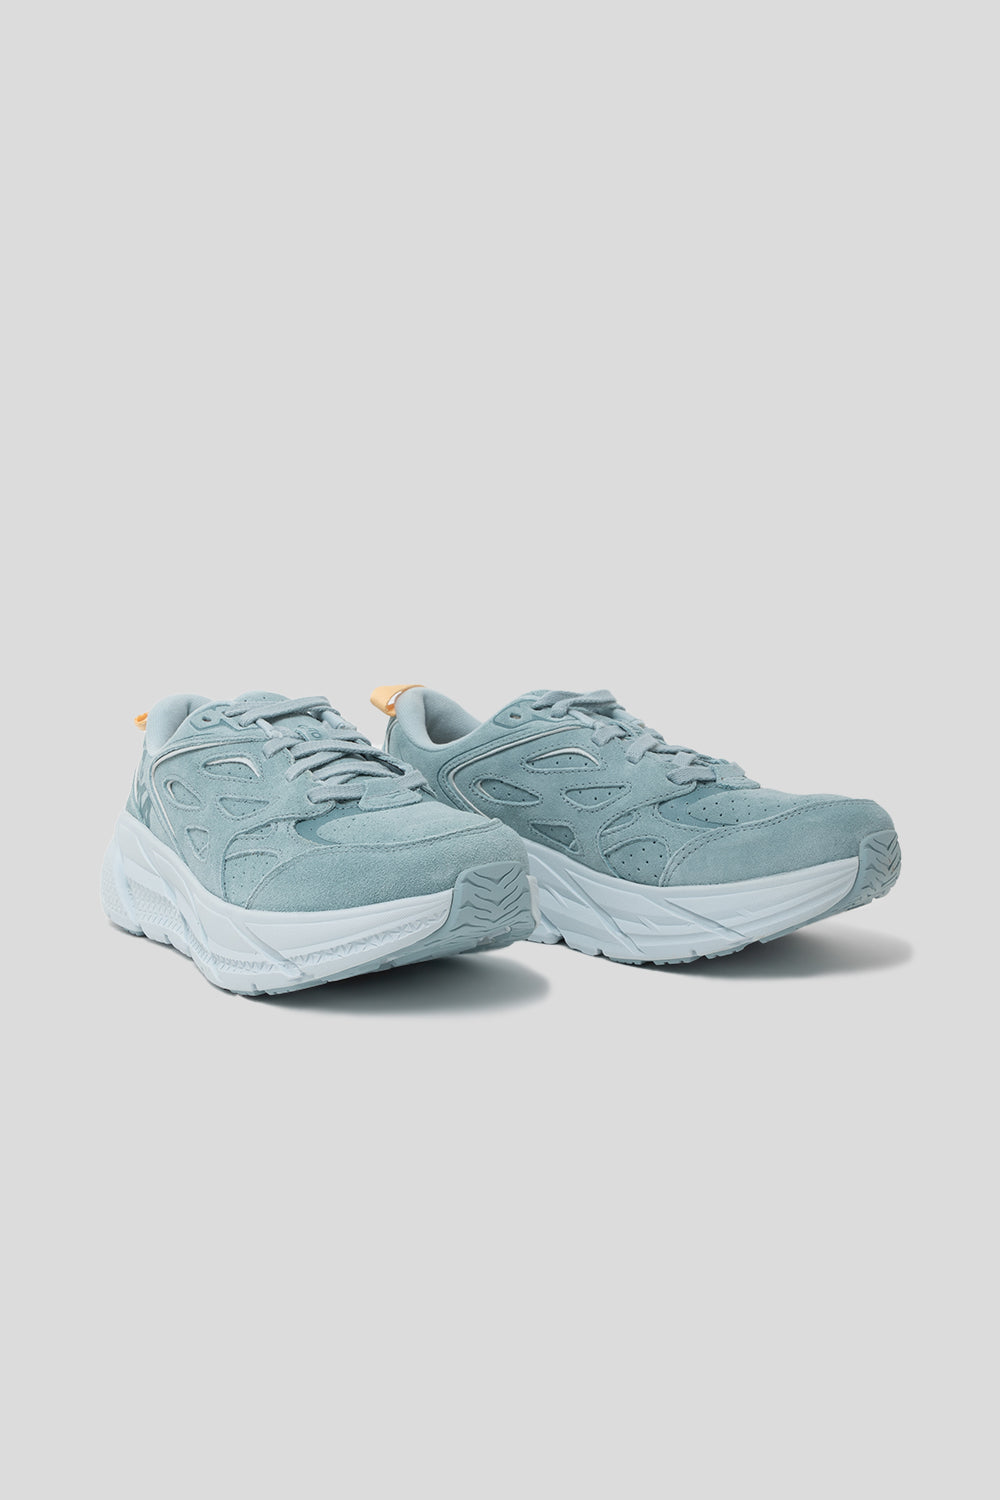 Hoka All Gender Clifton L Suede Shoe in Cloud Blue/Ice Flow